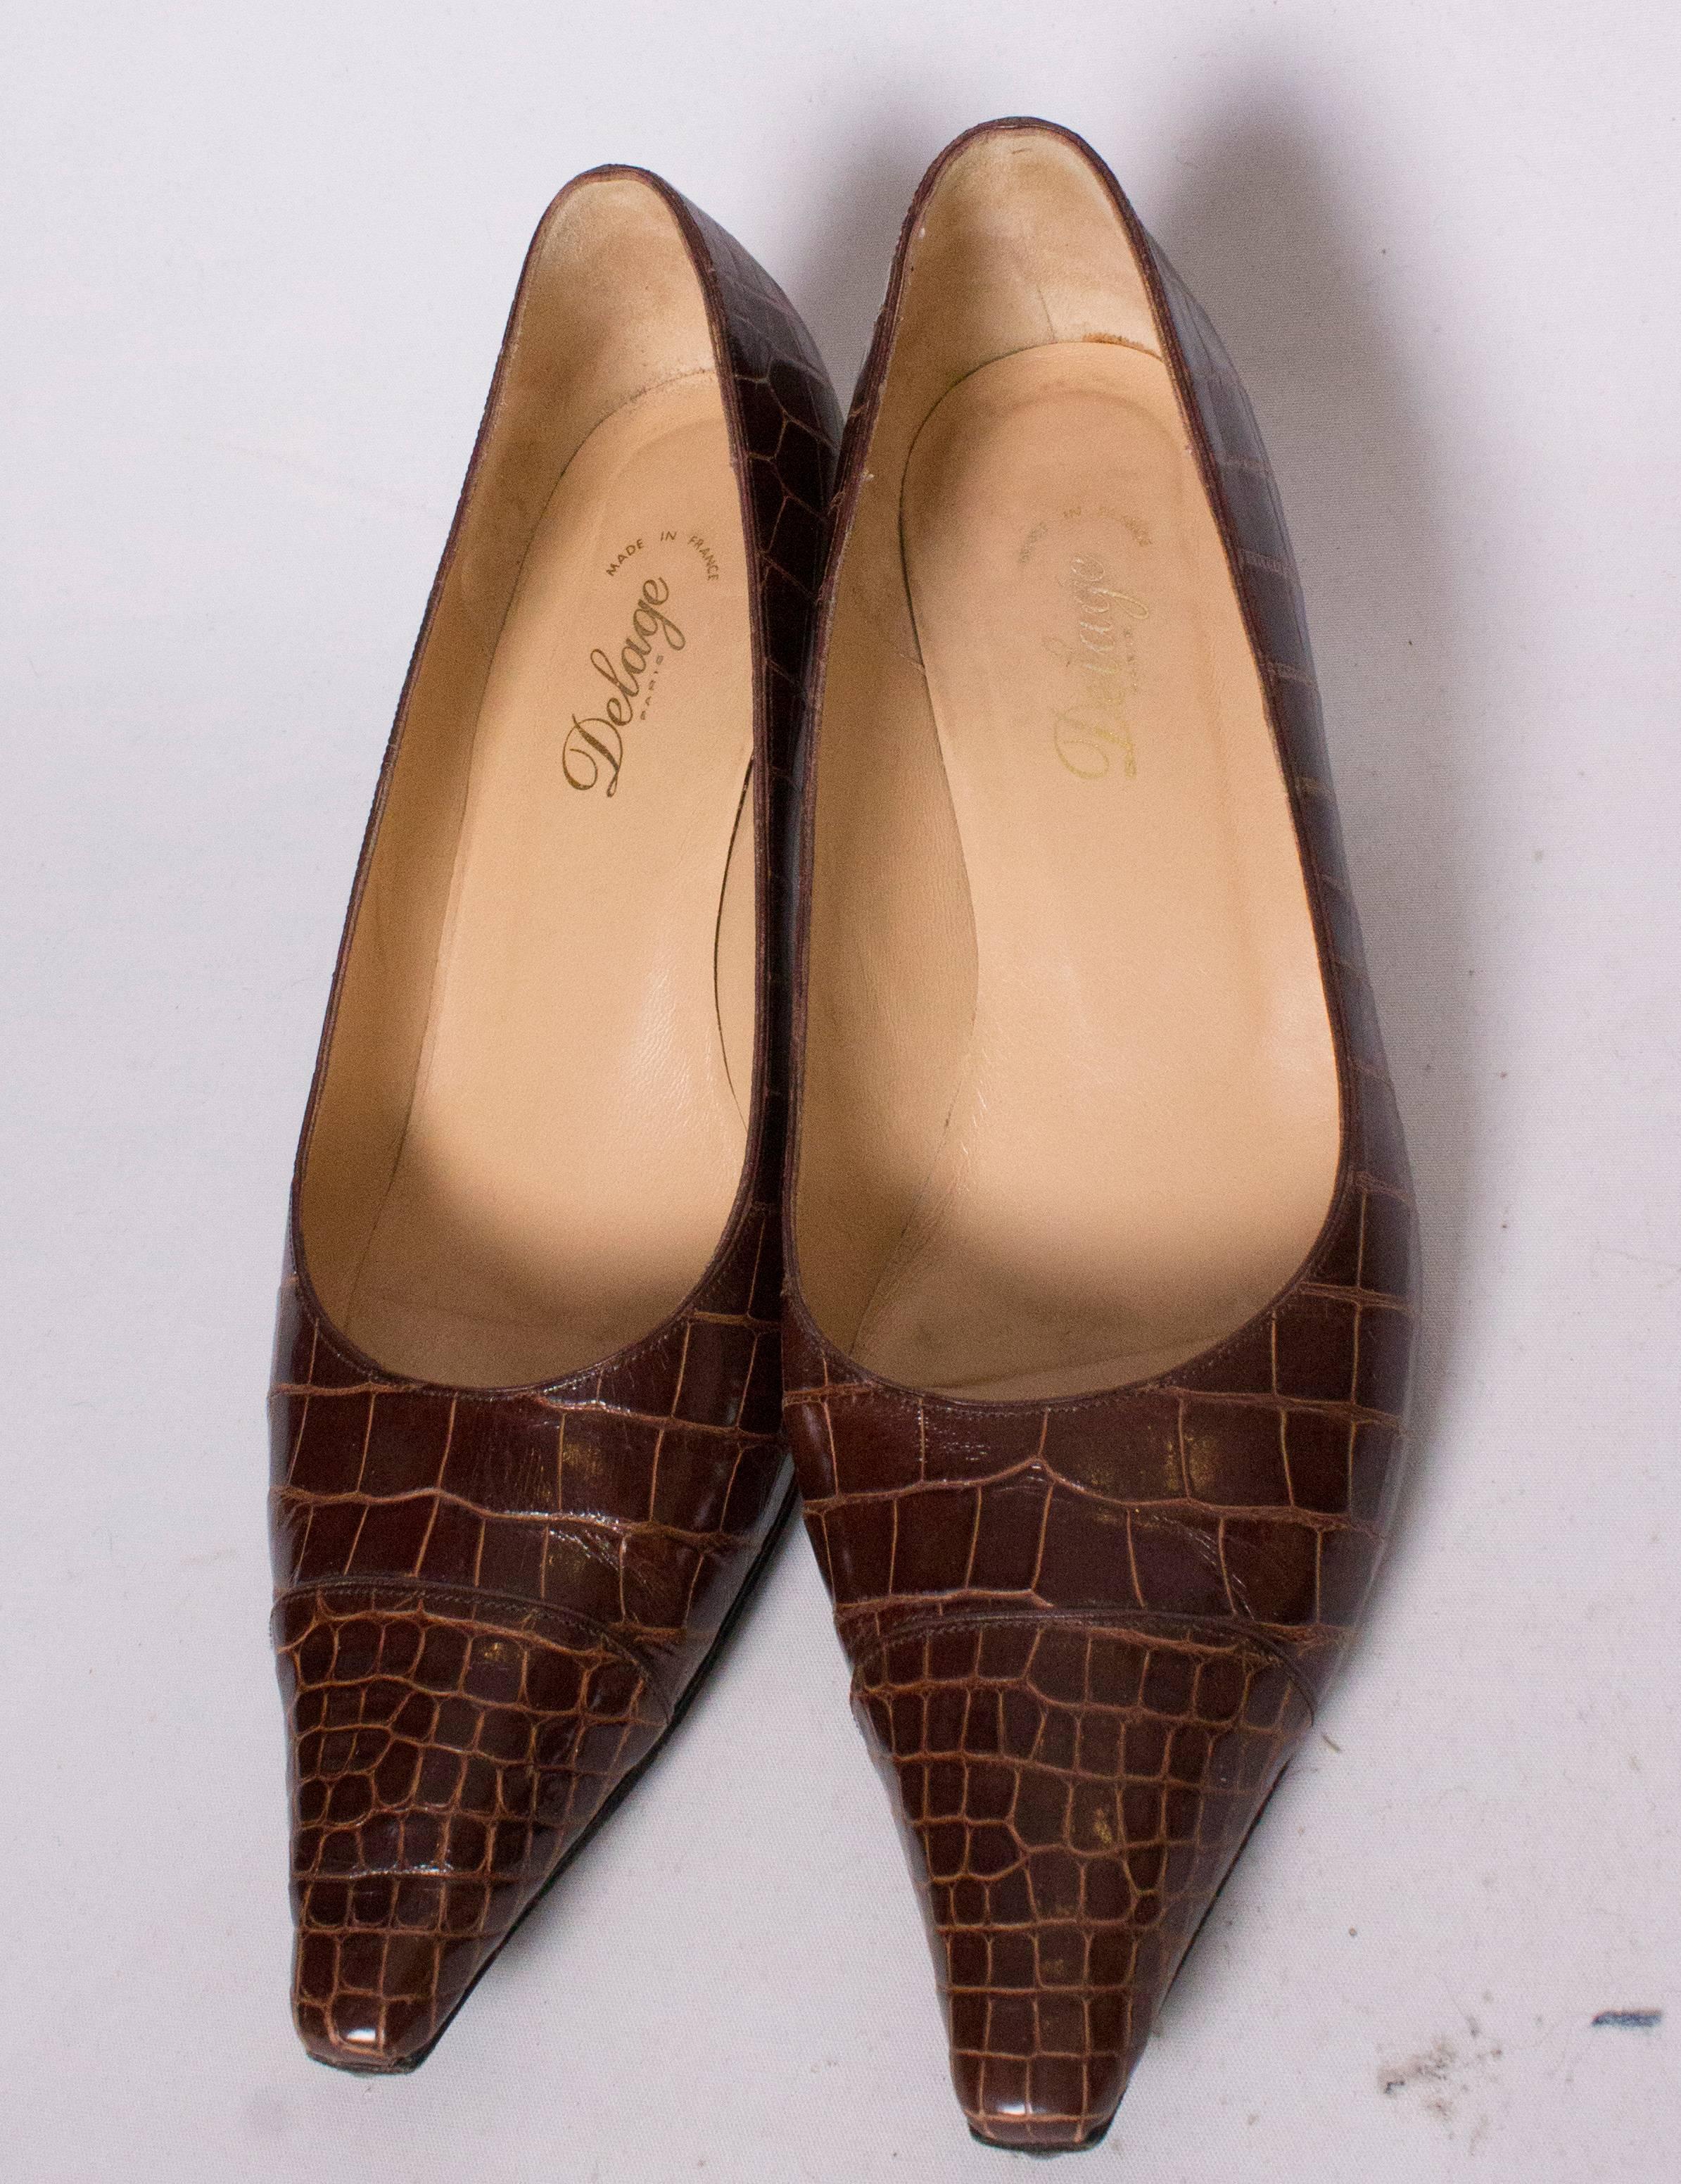 A chic pair of handmade shoes by Delage of Paris. In immaculate condition.